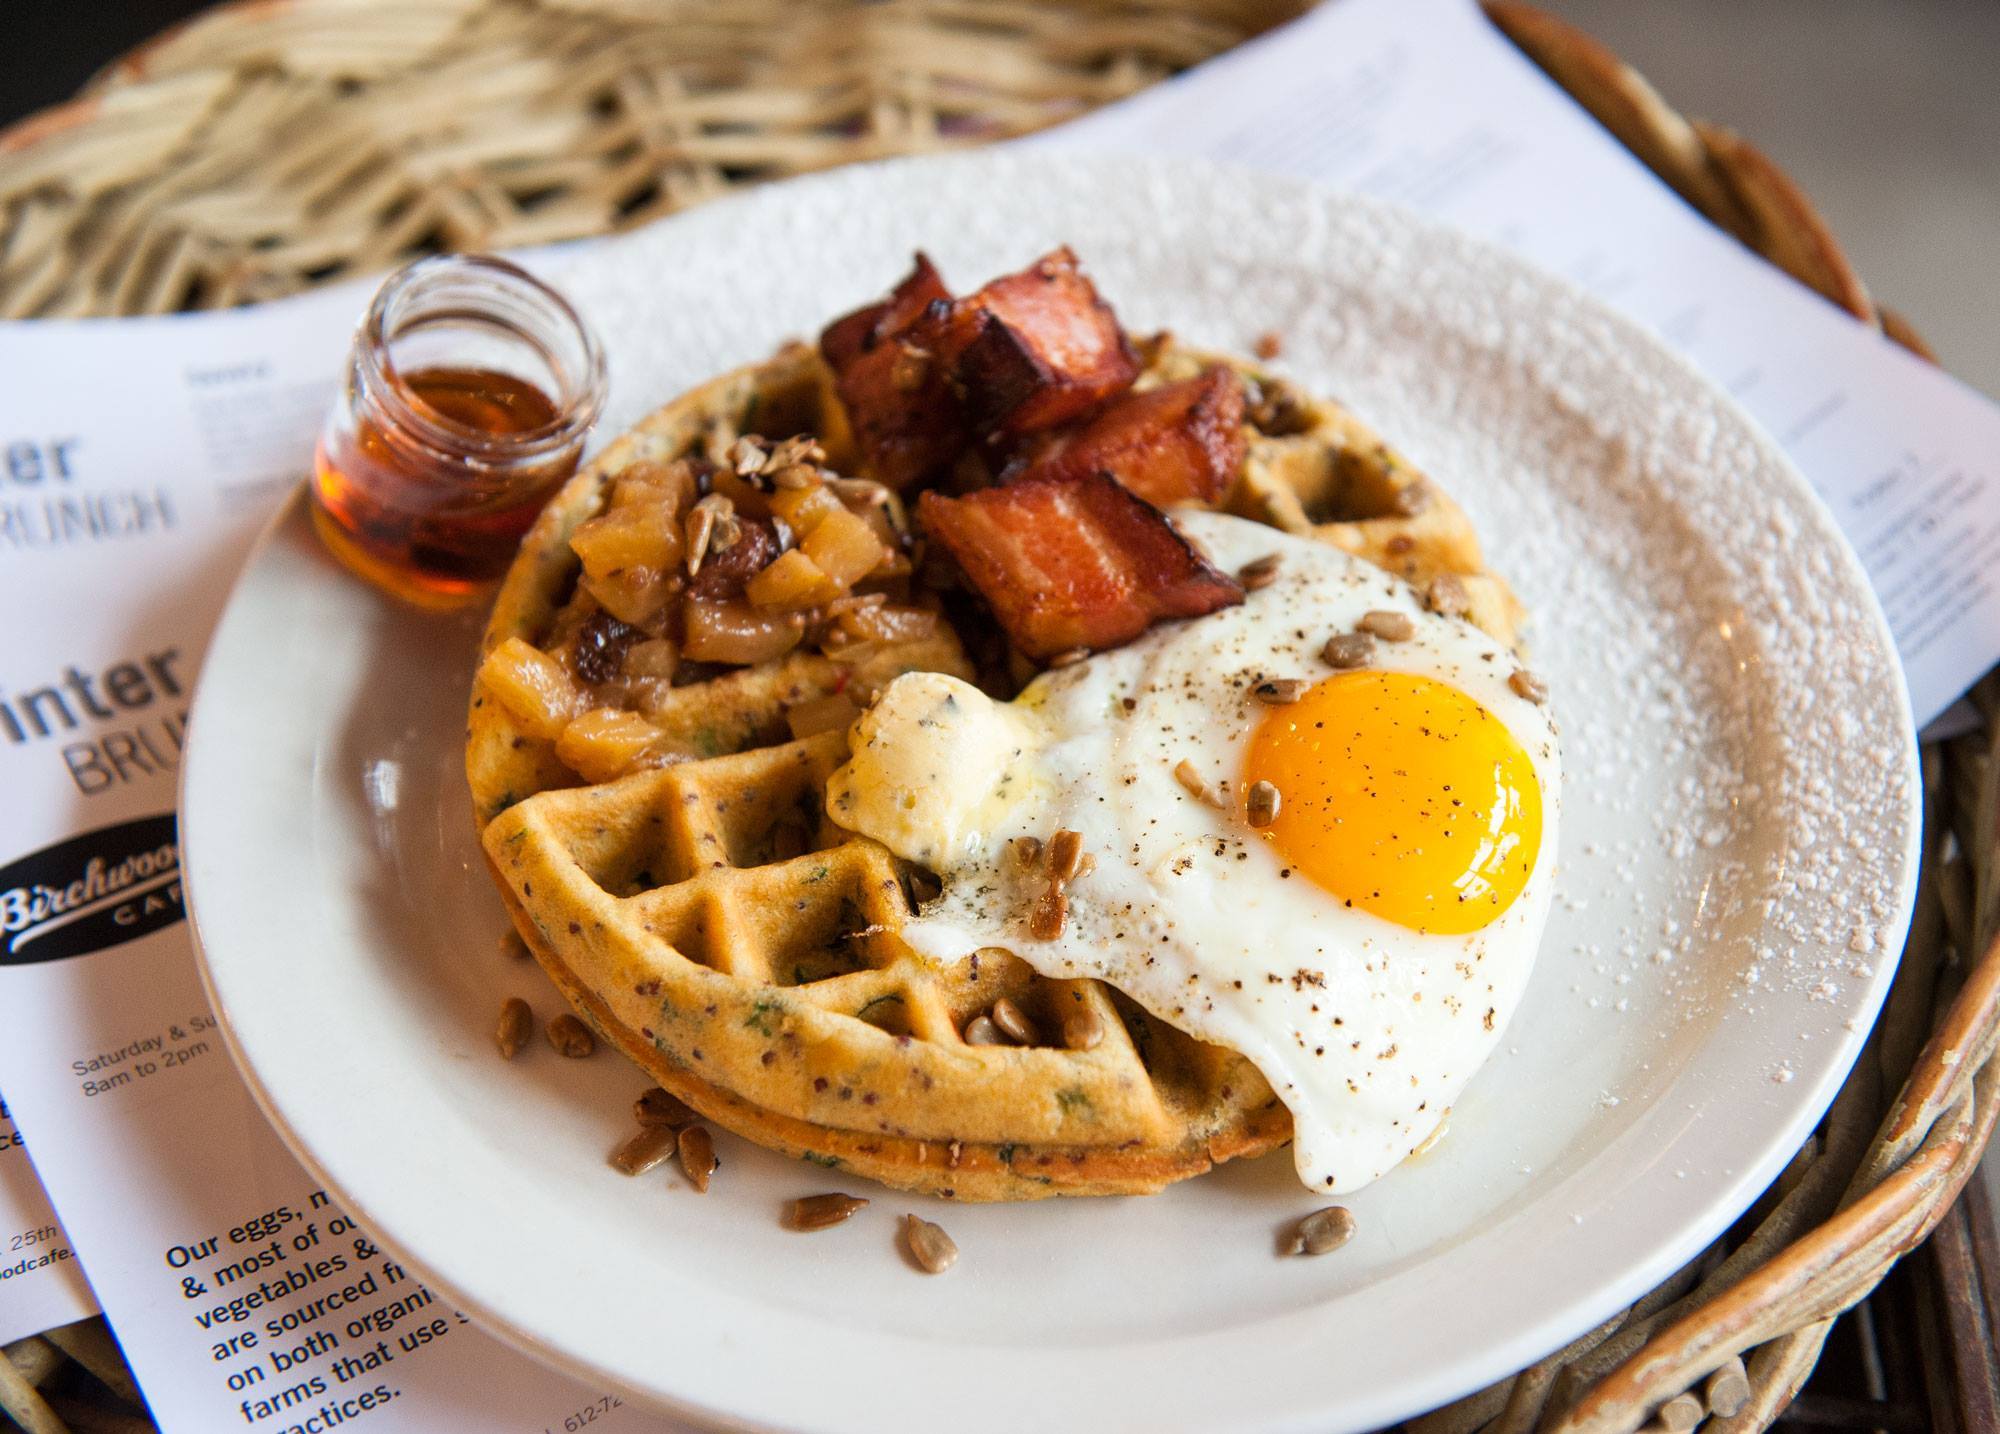 Birchwood Cafe's savory waffle with an egg and bacon